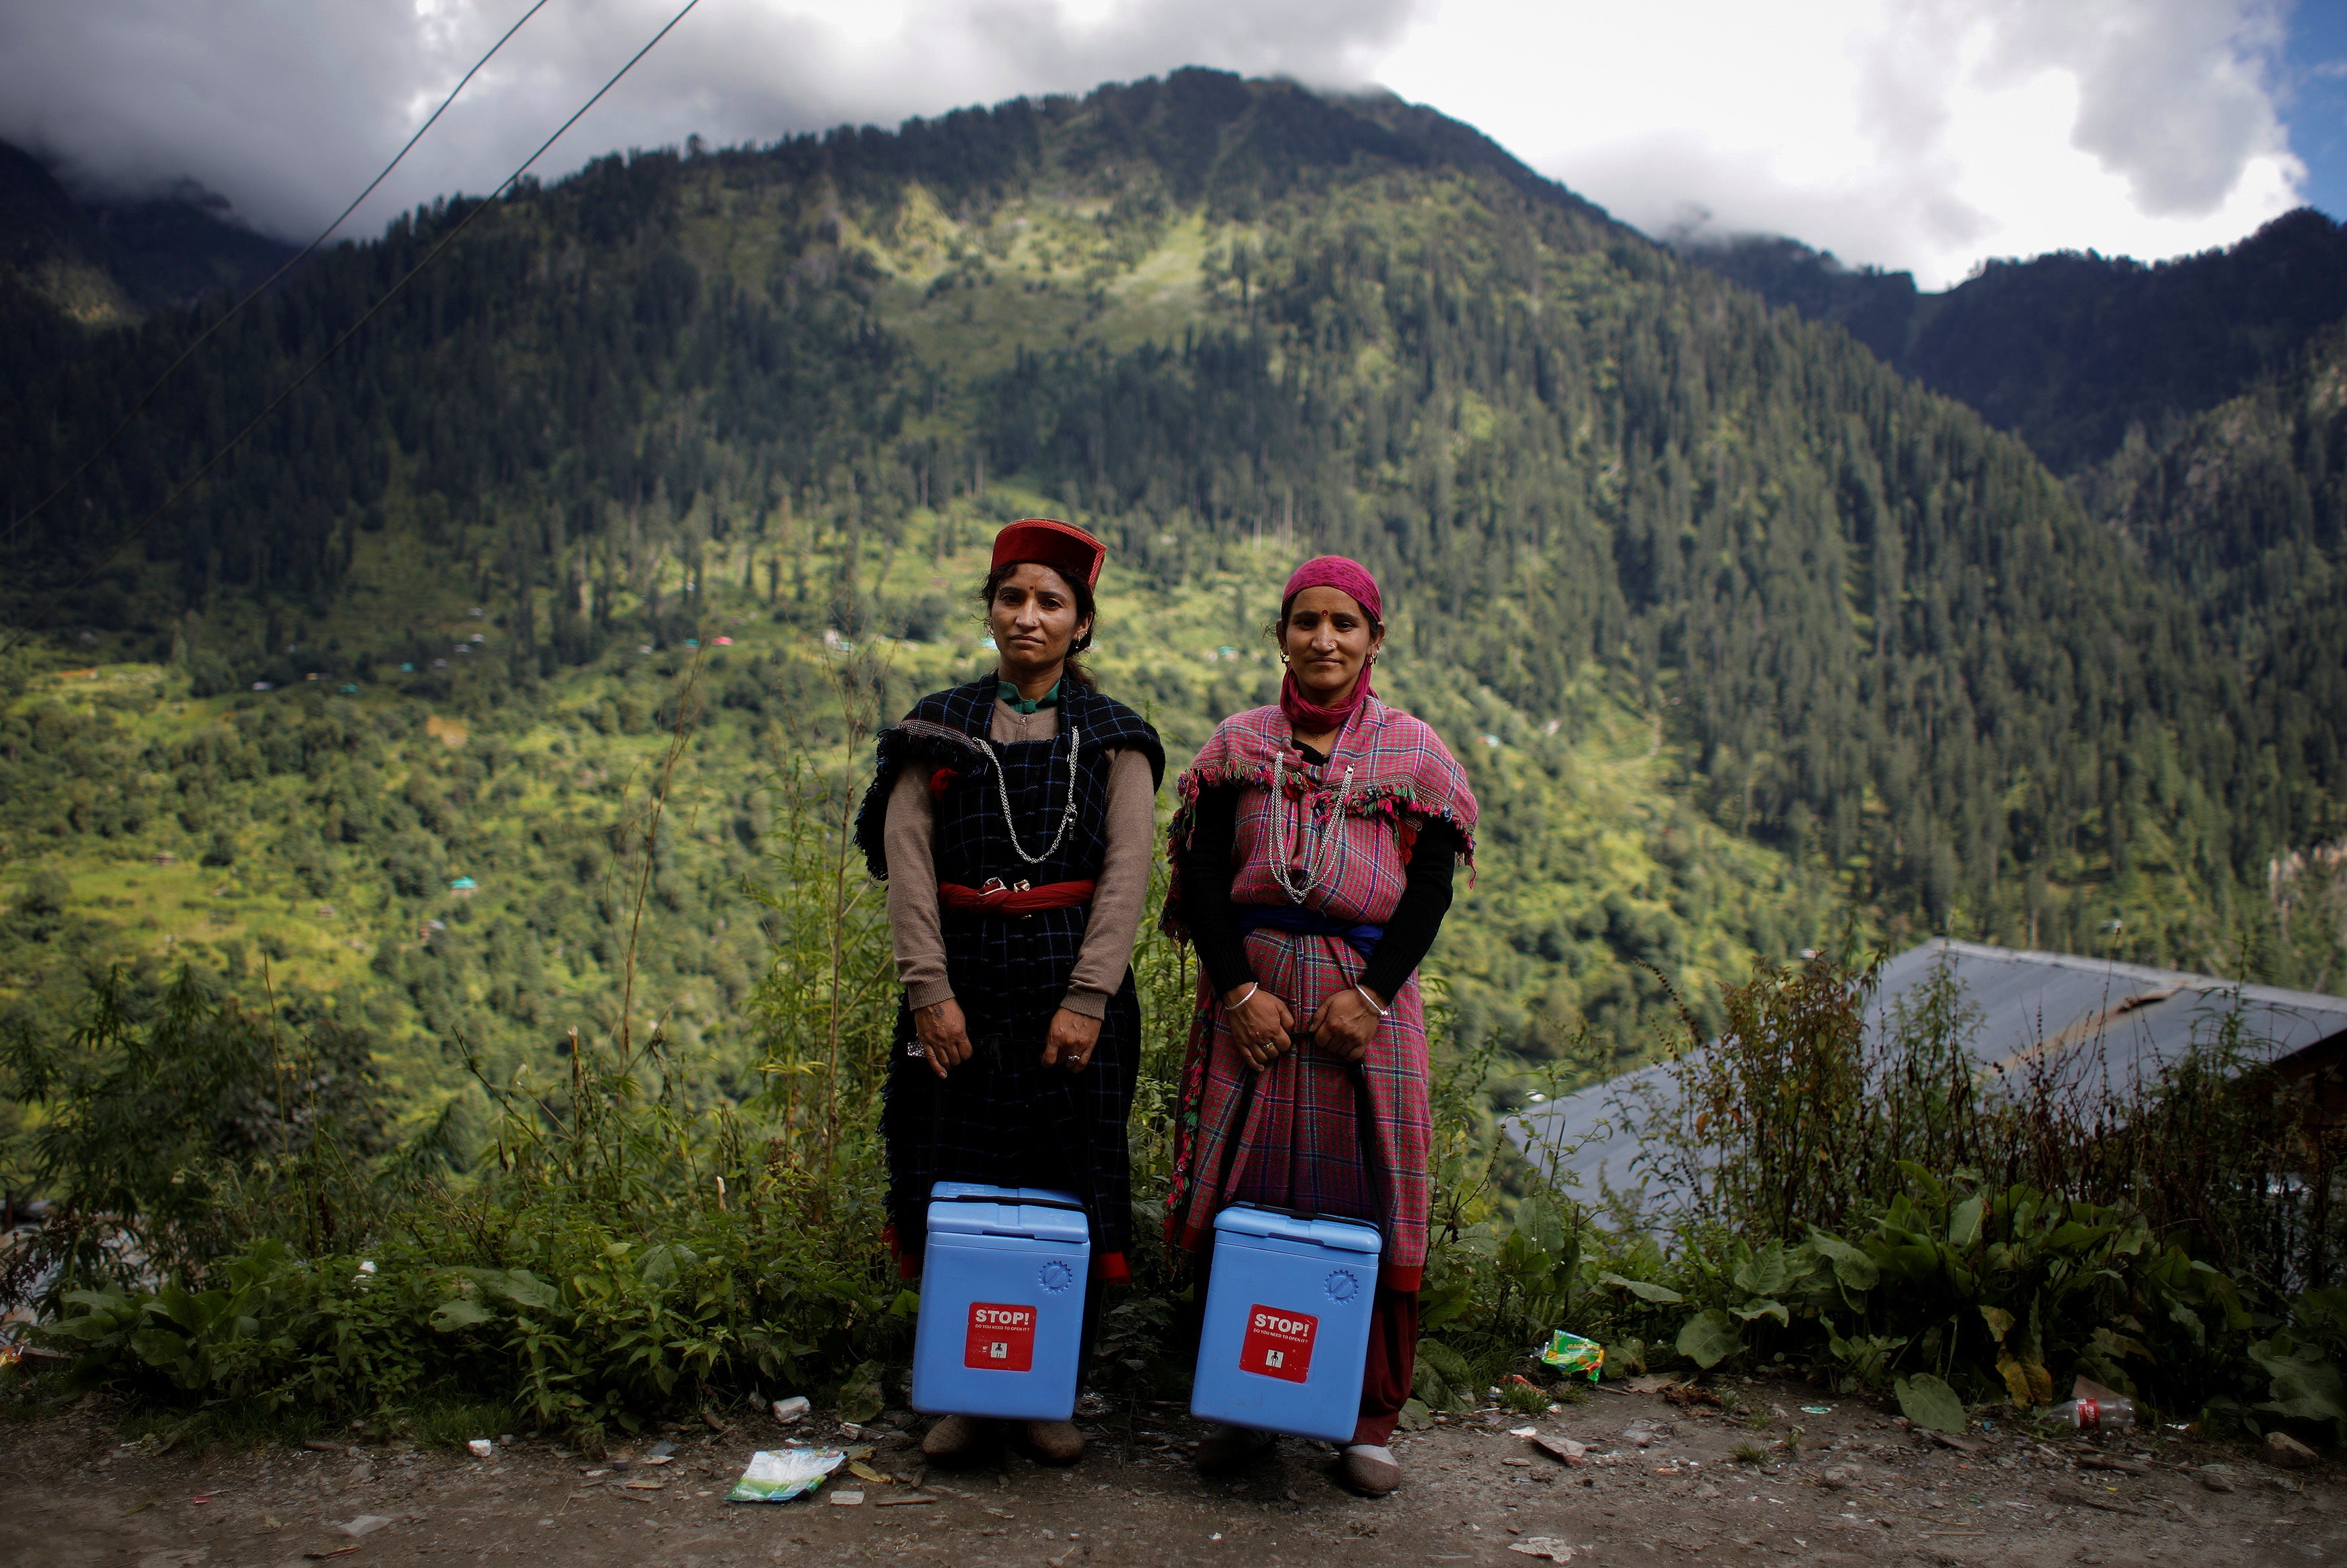 Health workers Nirma and Phula Devi hold boxes containing Covishield vaccines intended for Malana villagers in the Himalayan state of Himachal Pradesh